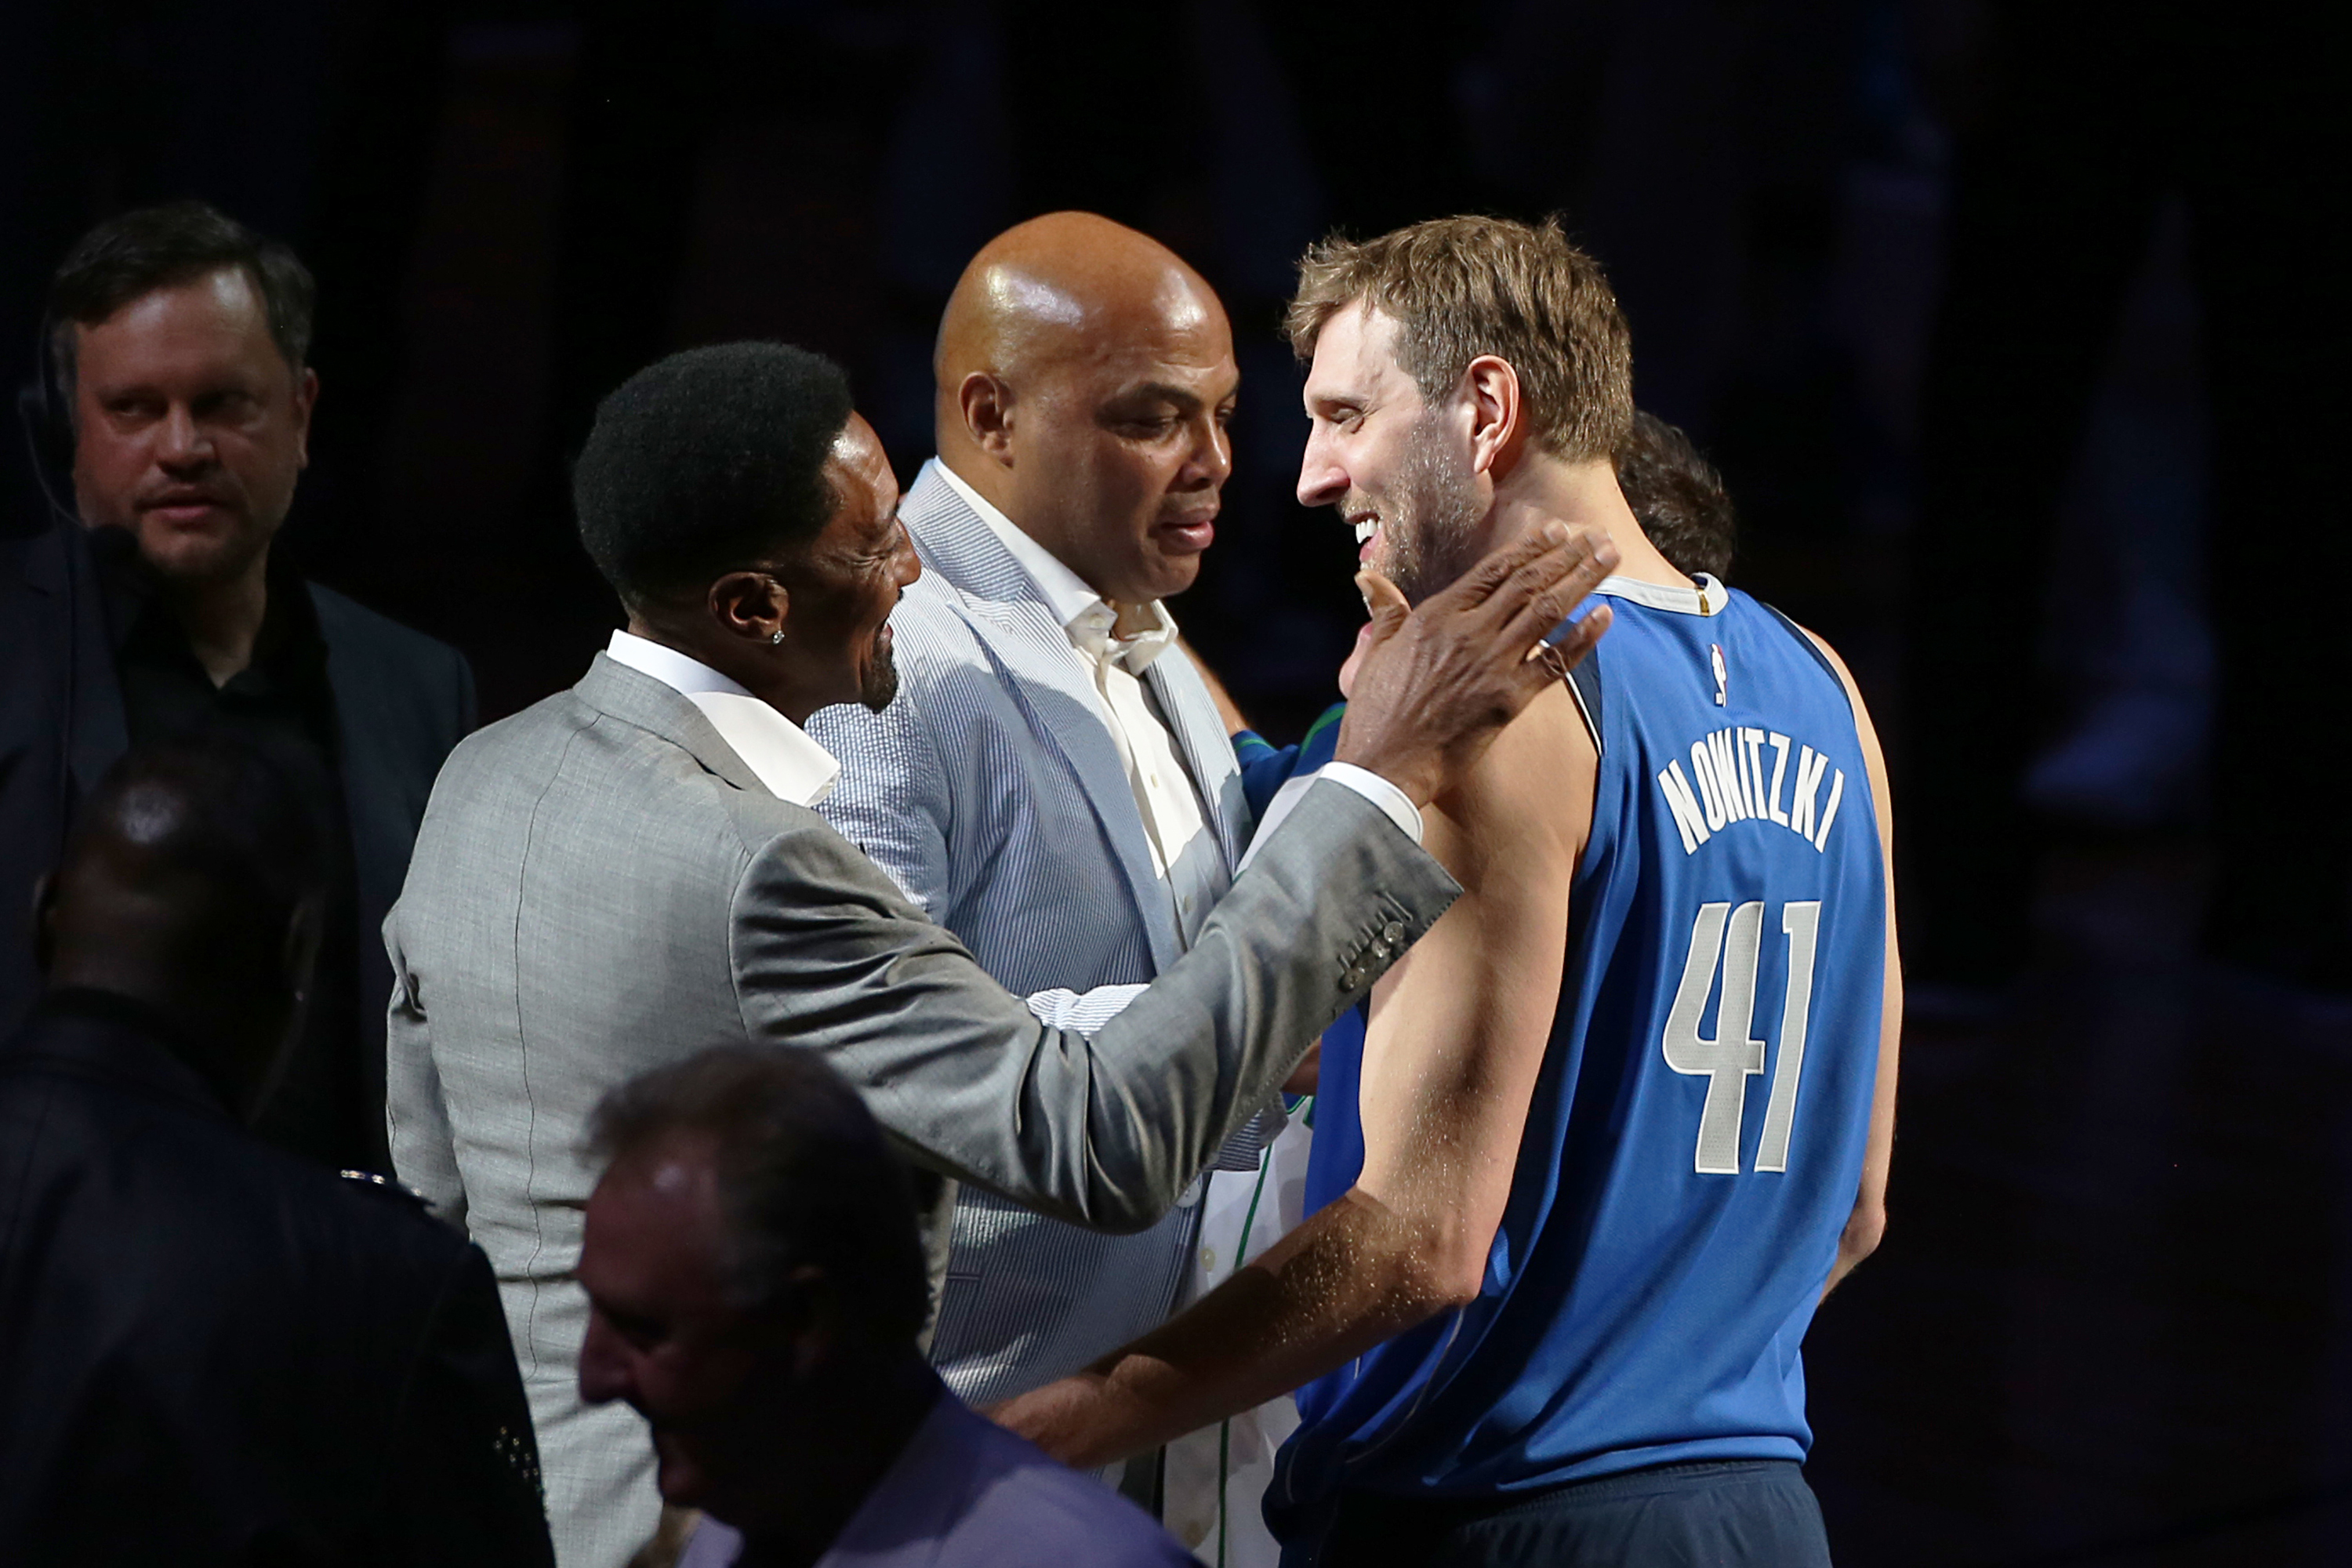 Scottie Pippen on X: What a night in Dallas… honored to join Larry,  Charles and so many others as @swish41 played his final home game. 41.21.1  #Dirk #MFFL  / X